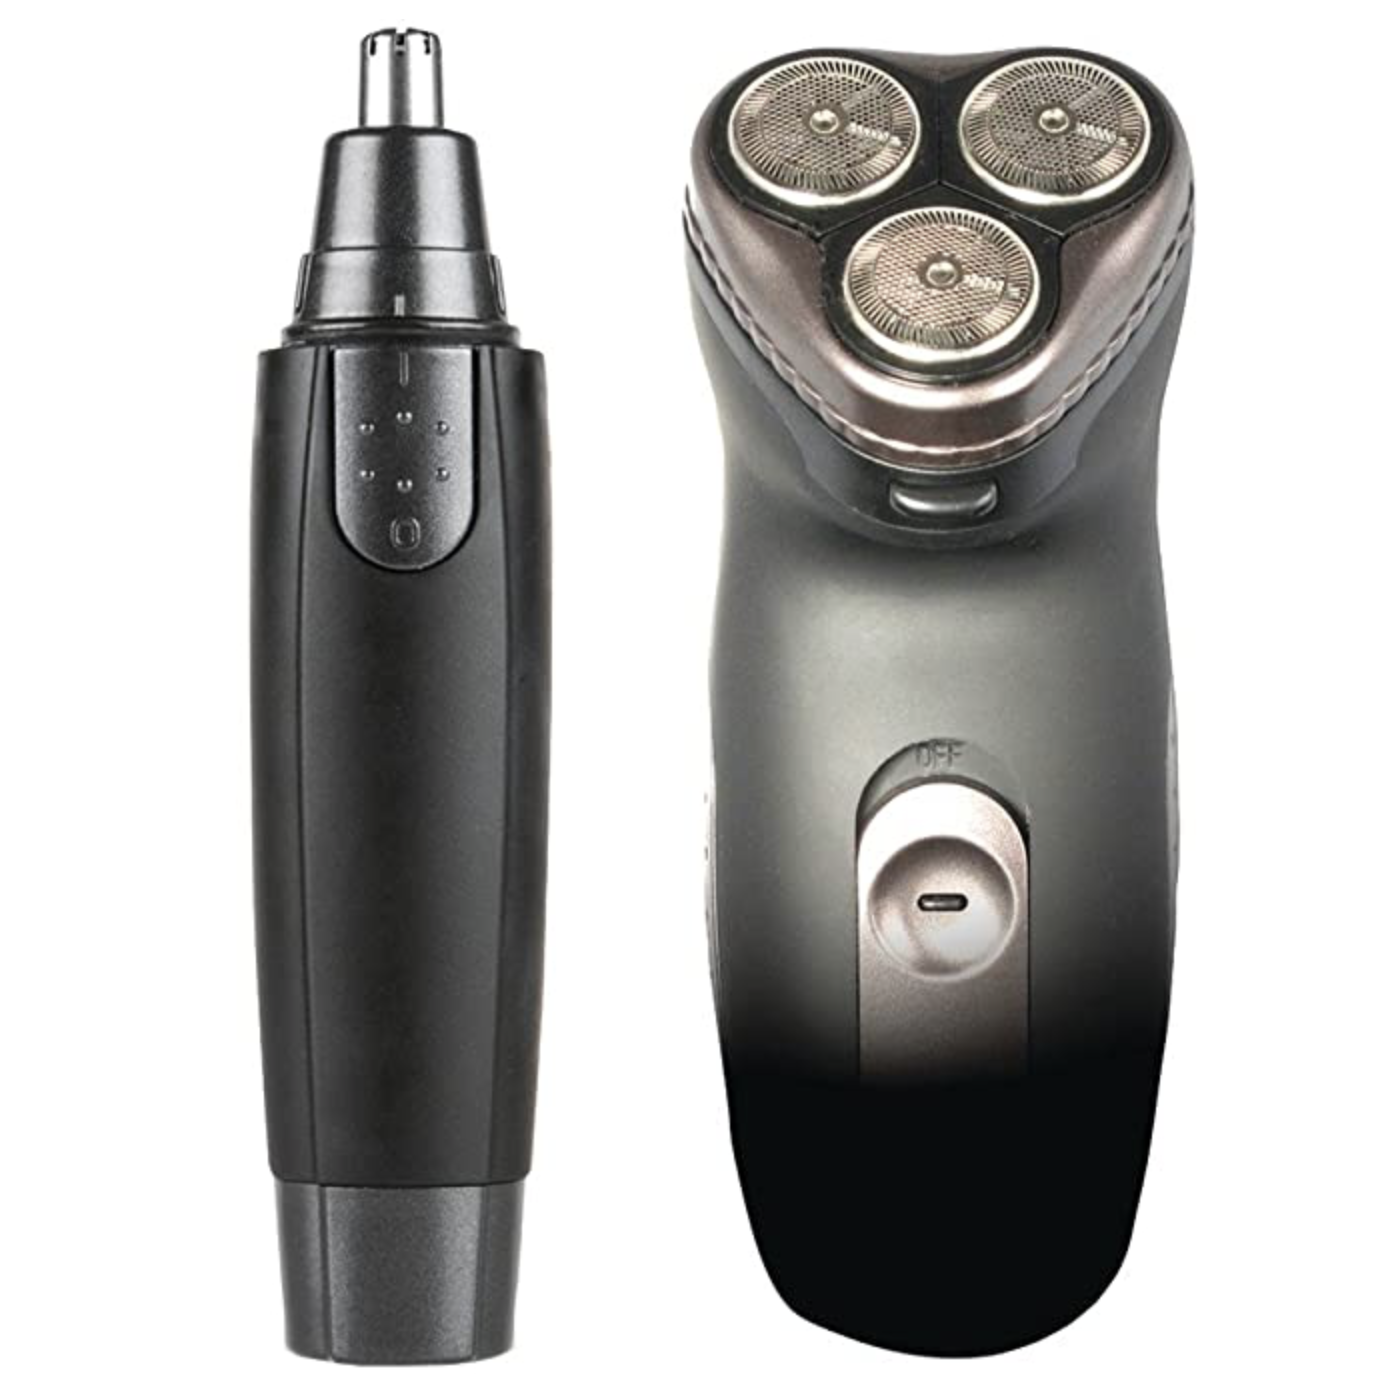 Rotary Shaver & Ear/Nose Trimmer Set